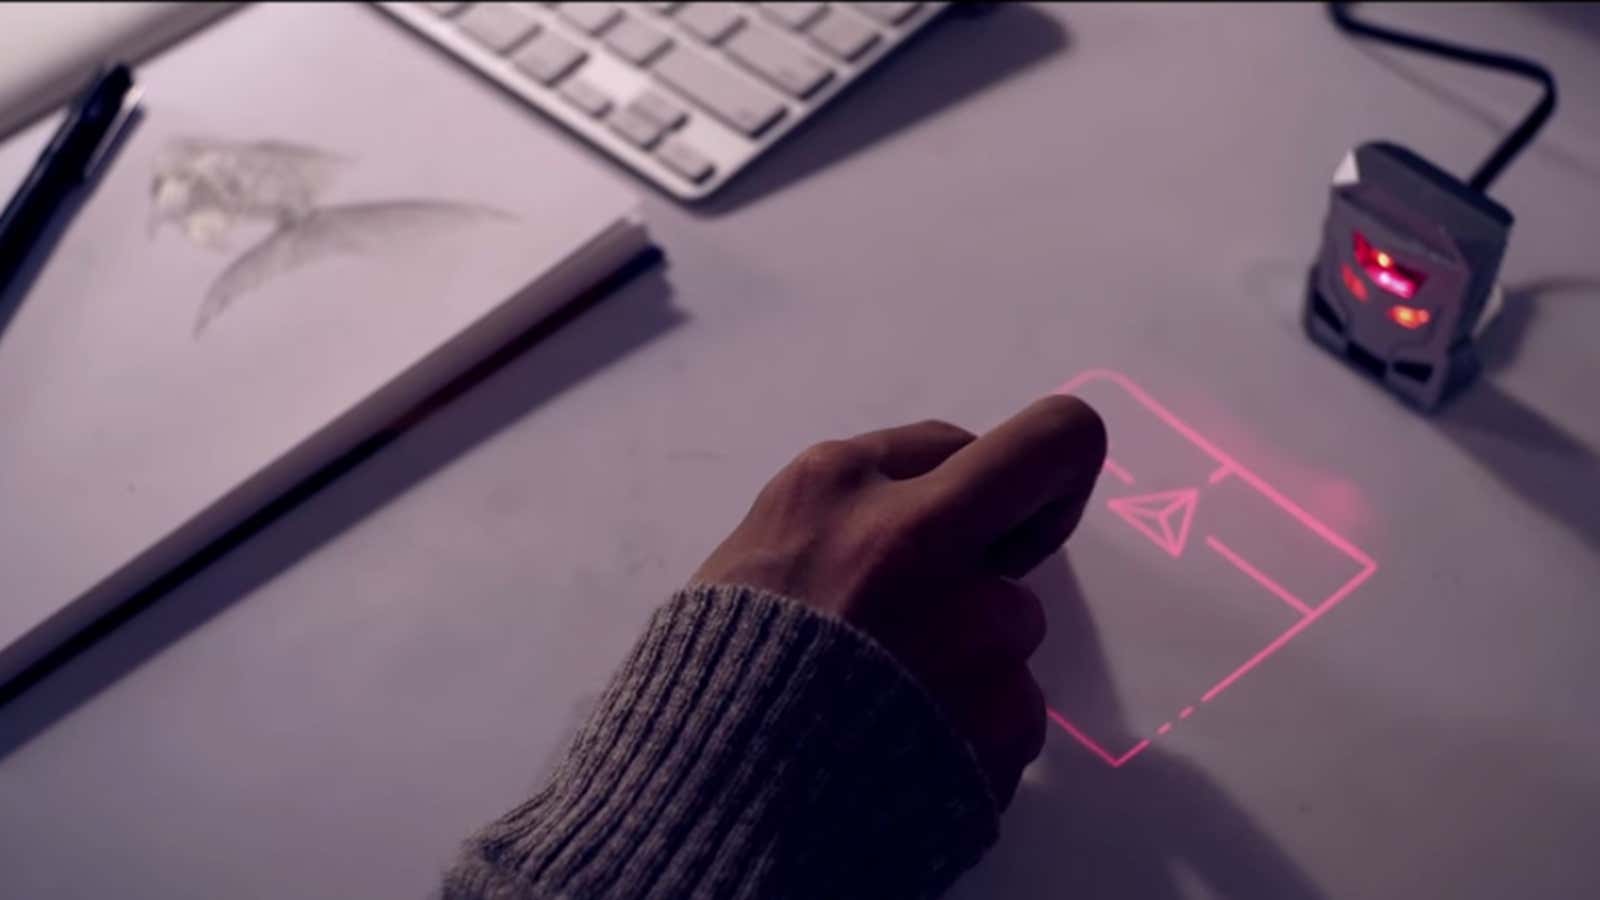 Awesome laser makes your mouse obsolete by projecting a trackpad on your desk